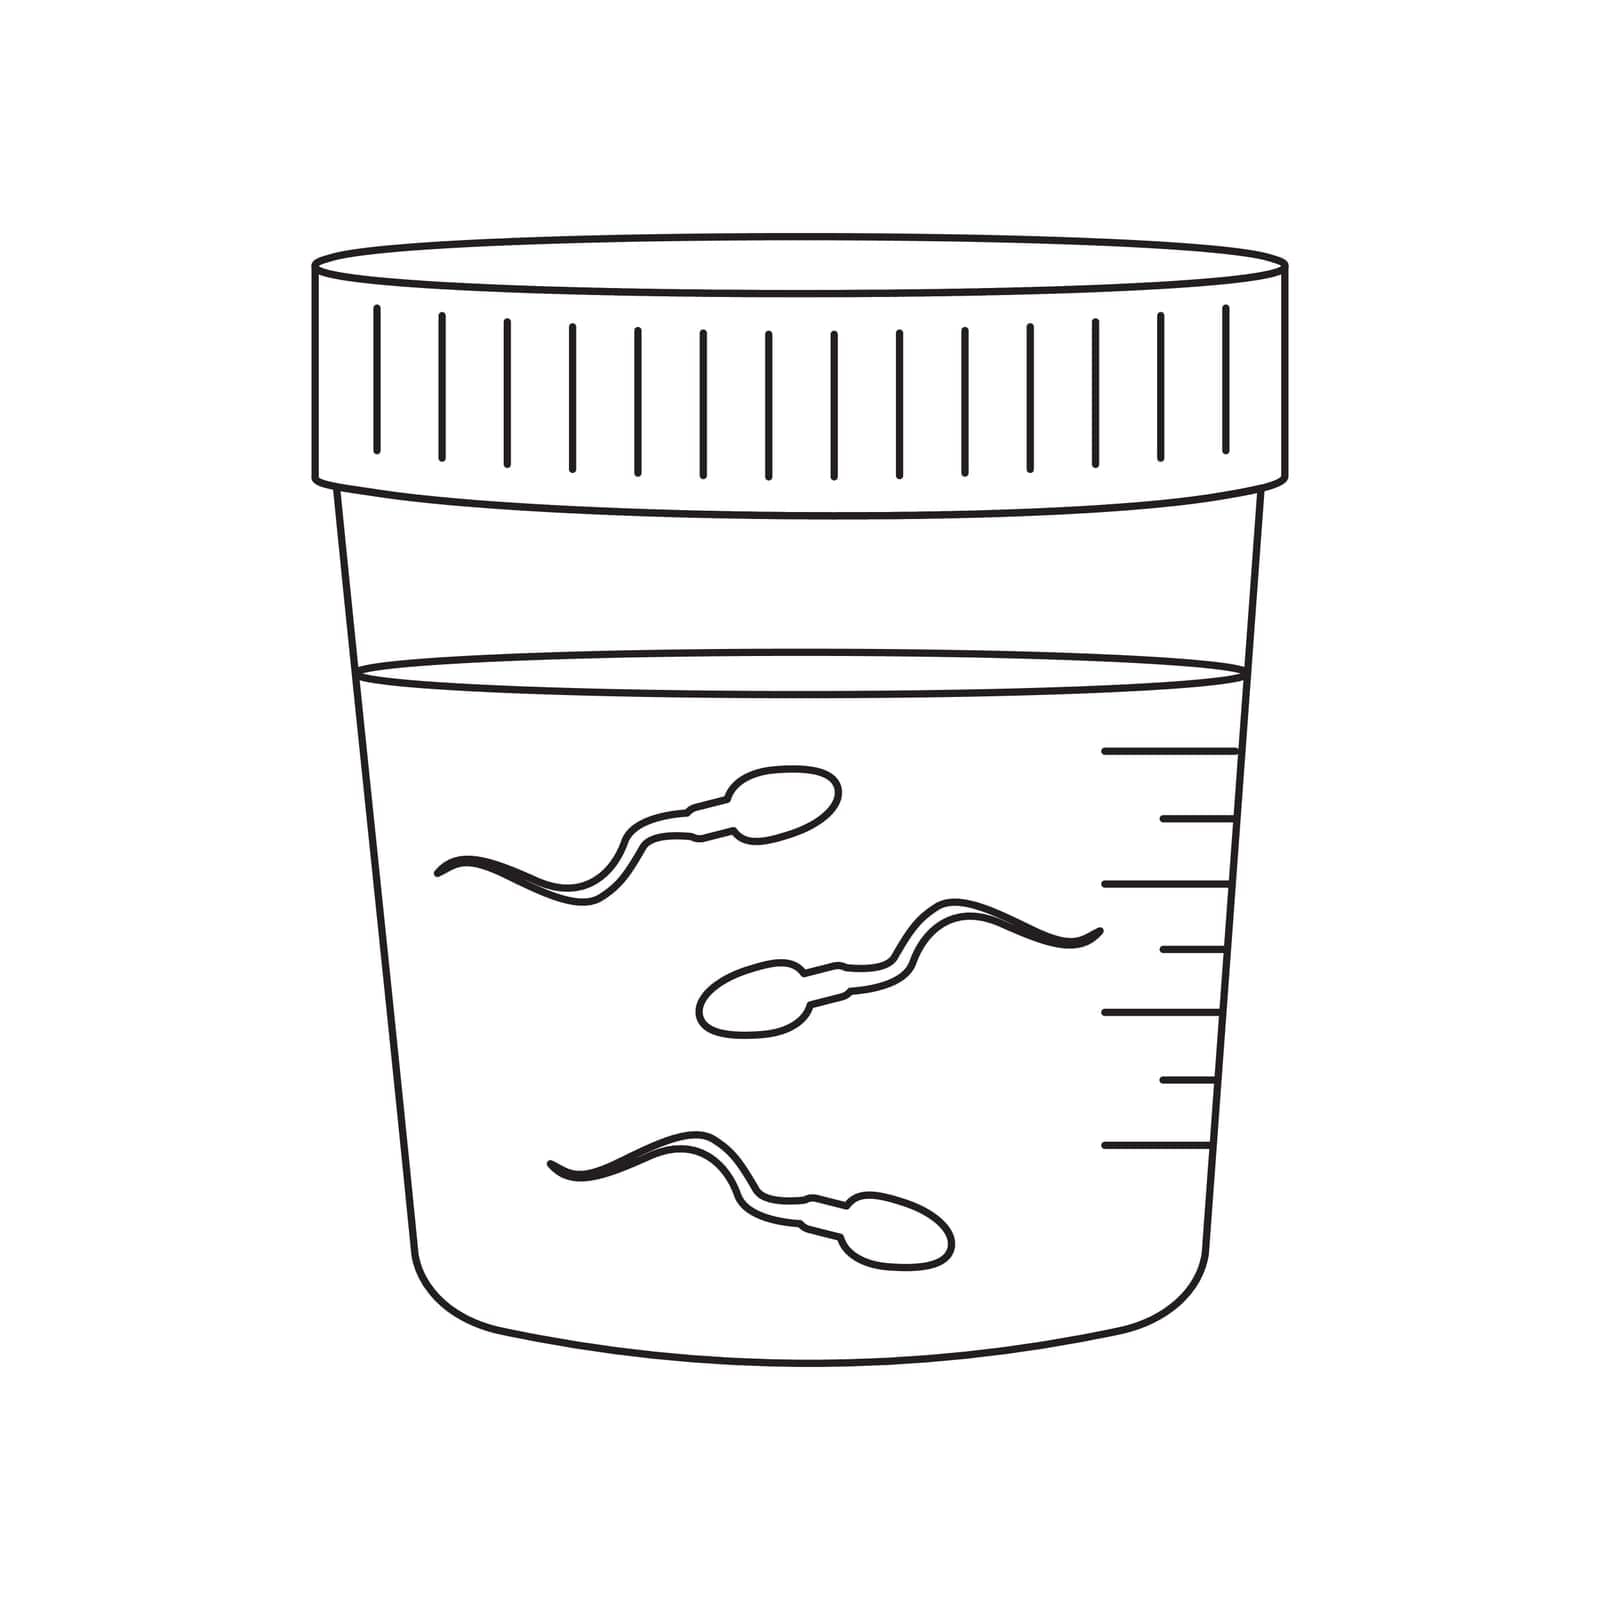 Semen analysis outline icon. Sperm sample in plastic container. Male fertility test. Sperm donation concept by Ablohina